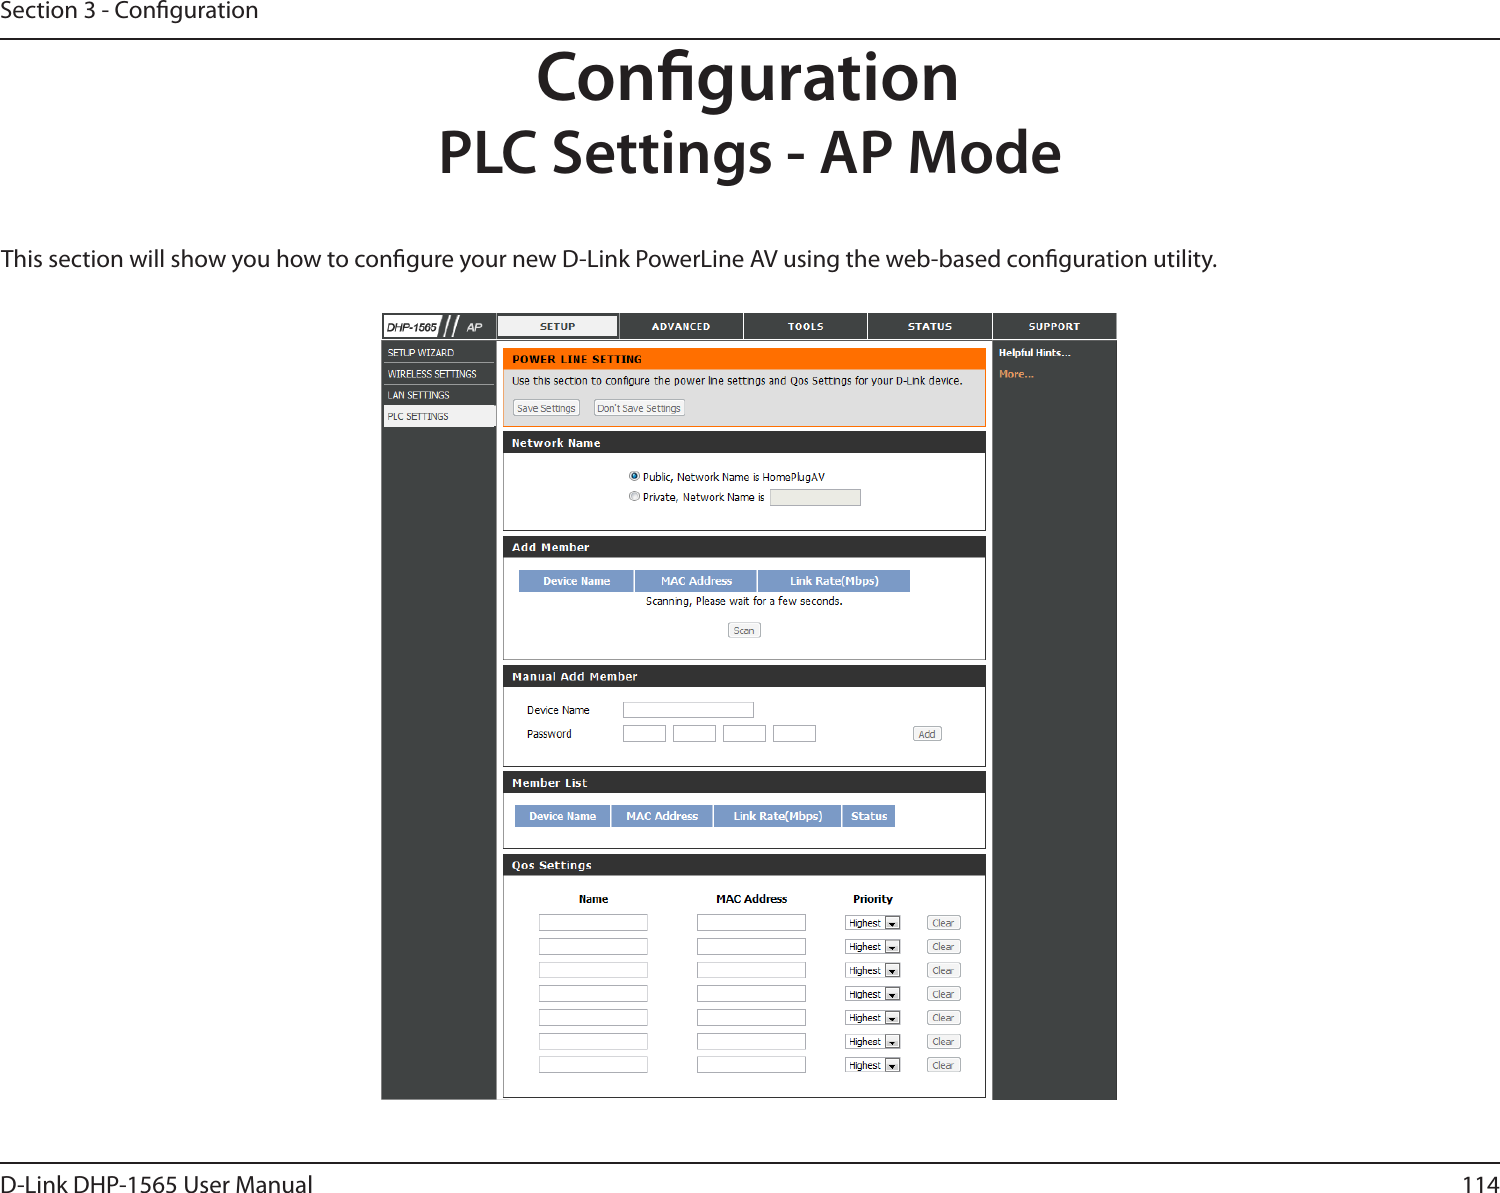 114D-Link DHP-1565 User ManualSection 3 - CongurationCongurationThis section will show you how to congure your new D-Link PowerLine AV using the web-based conguration utility.PLC Settings - AP Mode